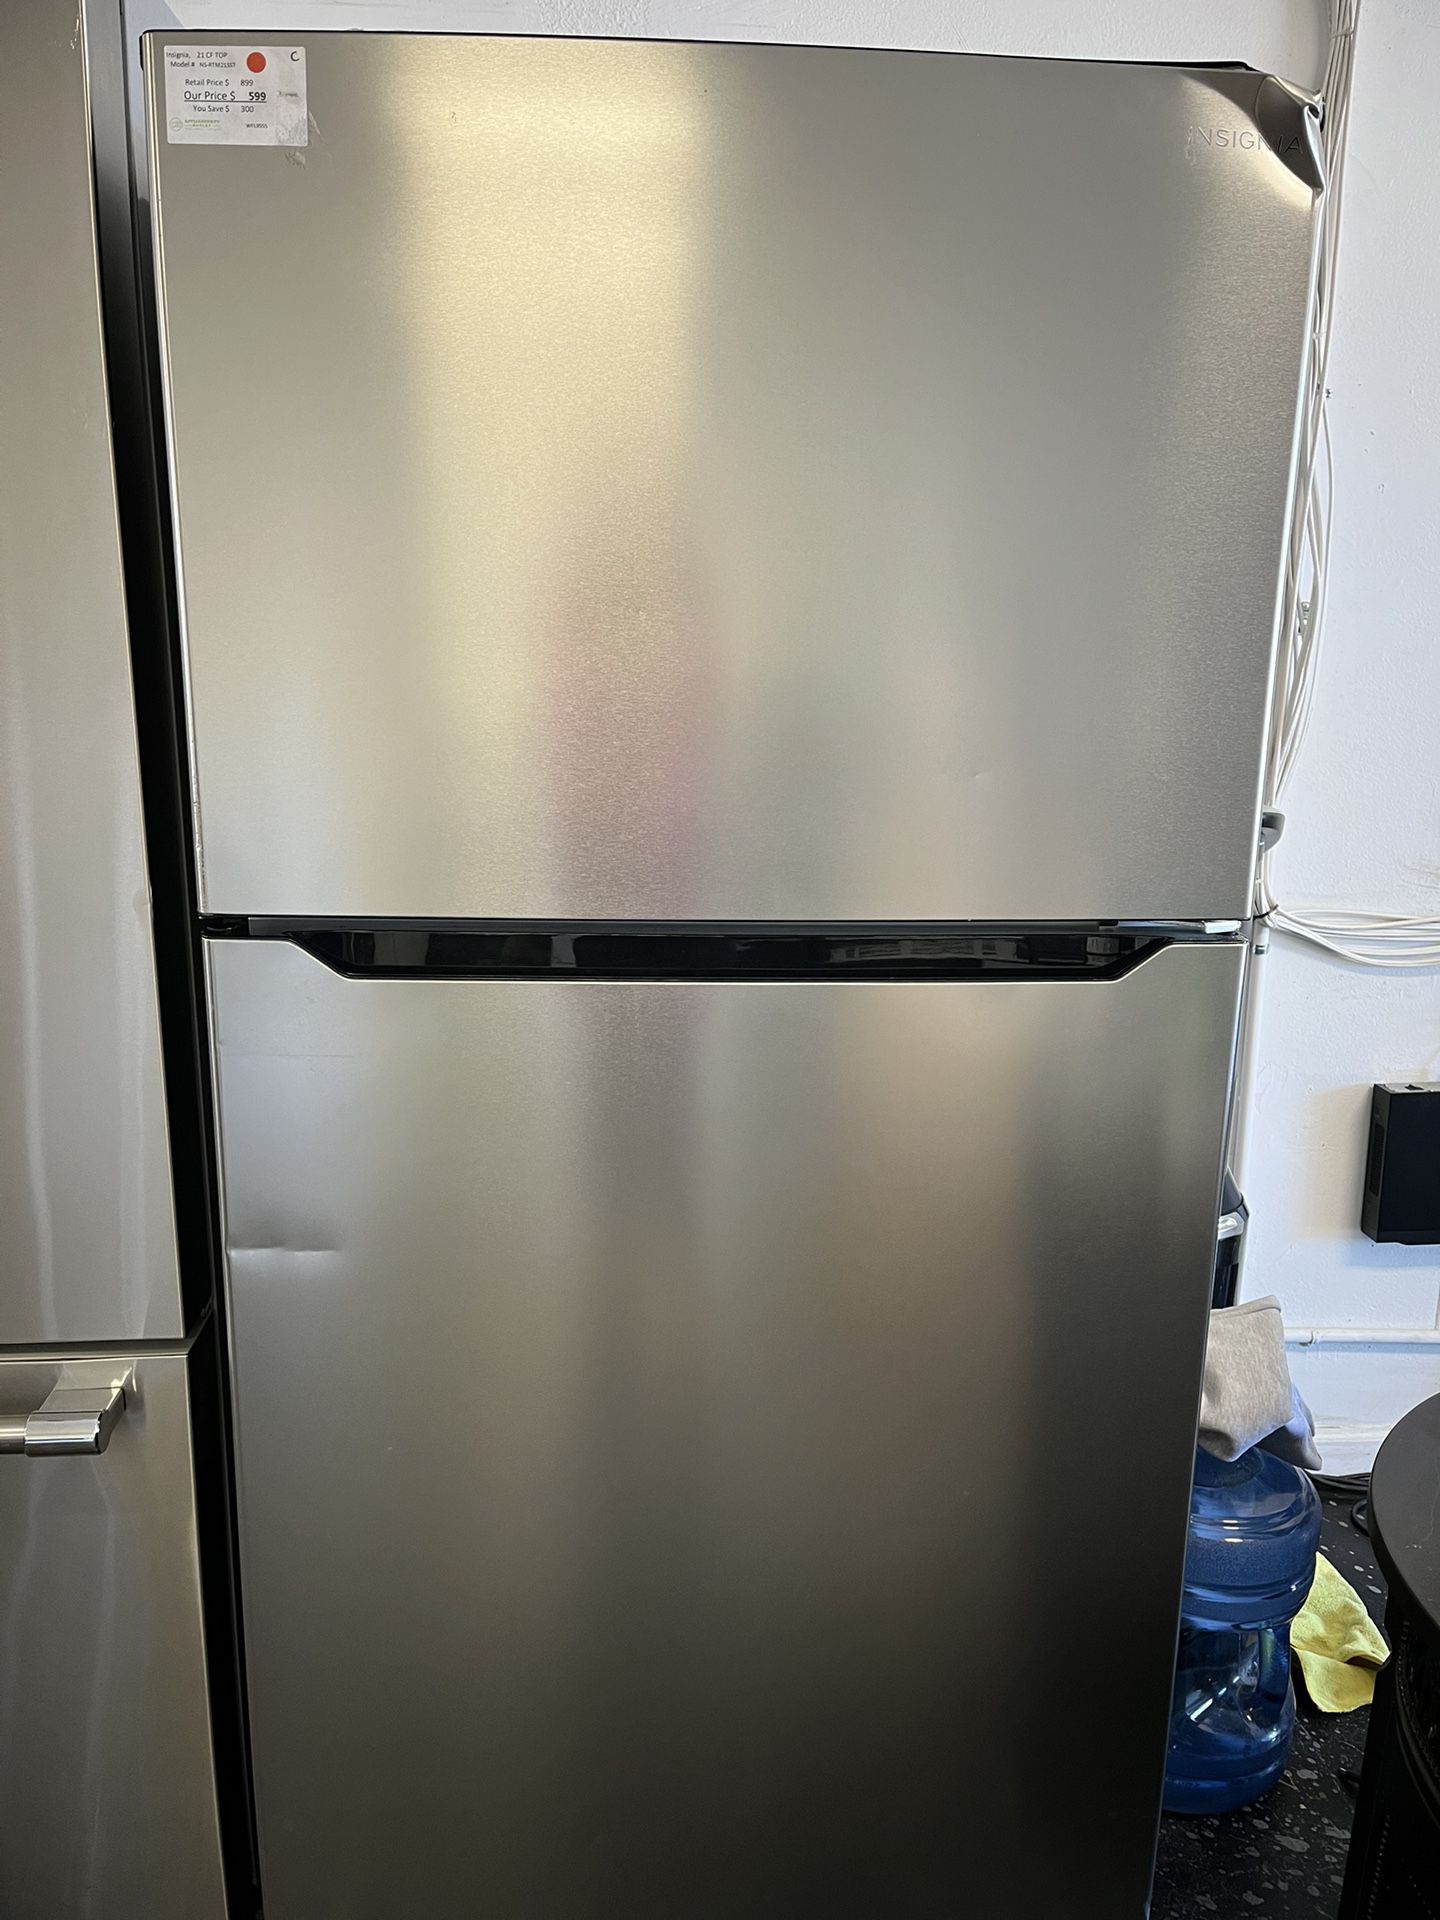 🌷🌷🌷 Insignia 21” Cubic Refrigerator Stainless Steel 🌷🌷🌷